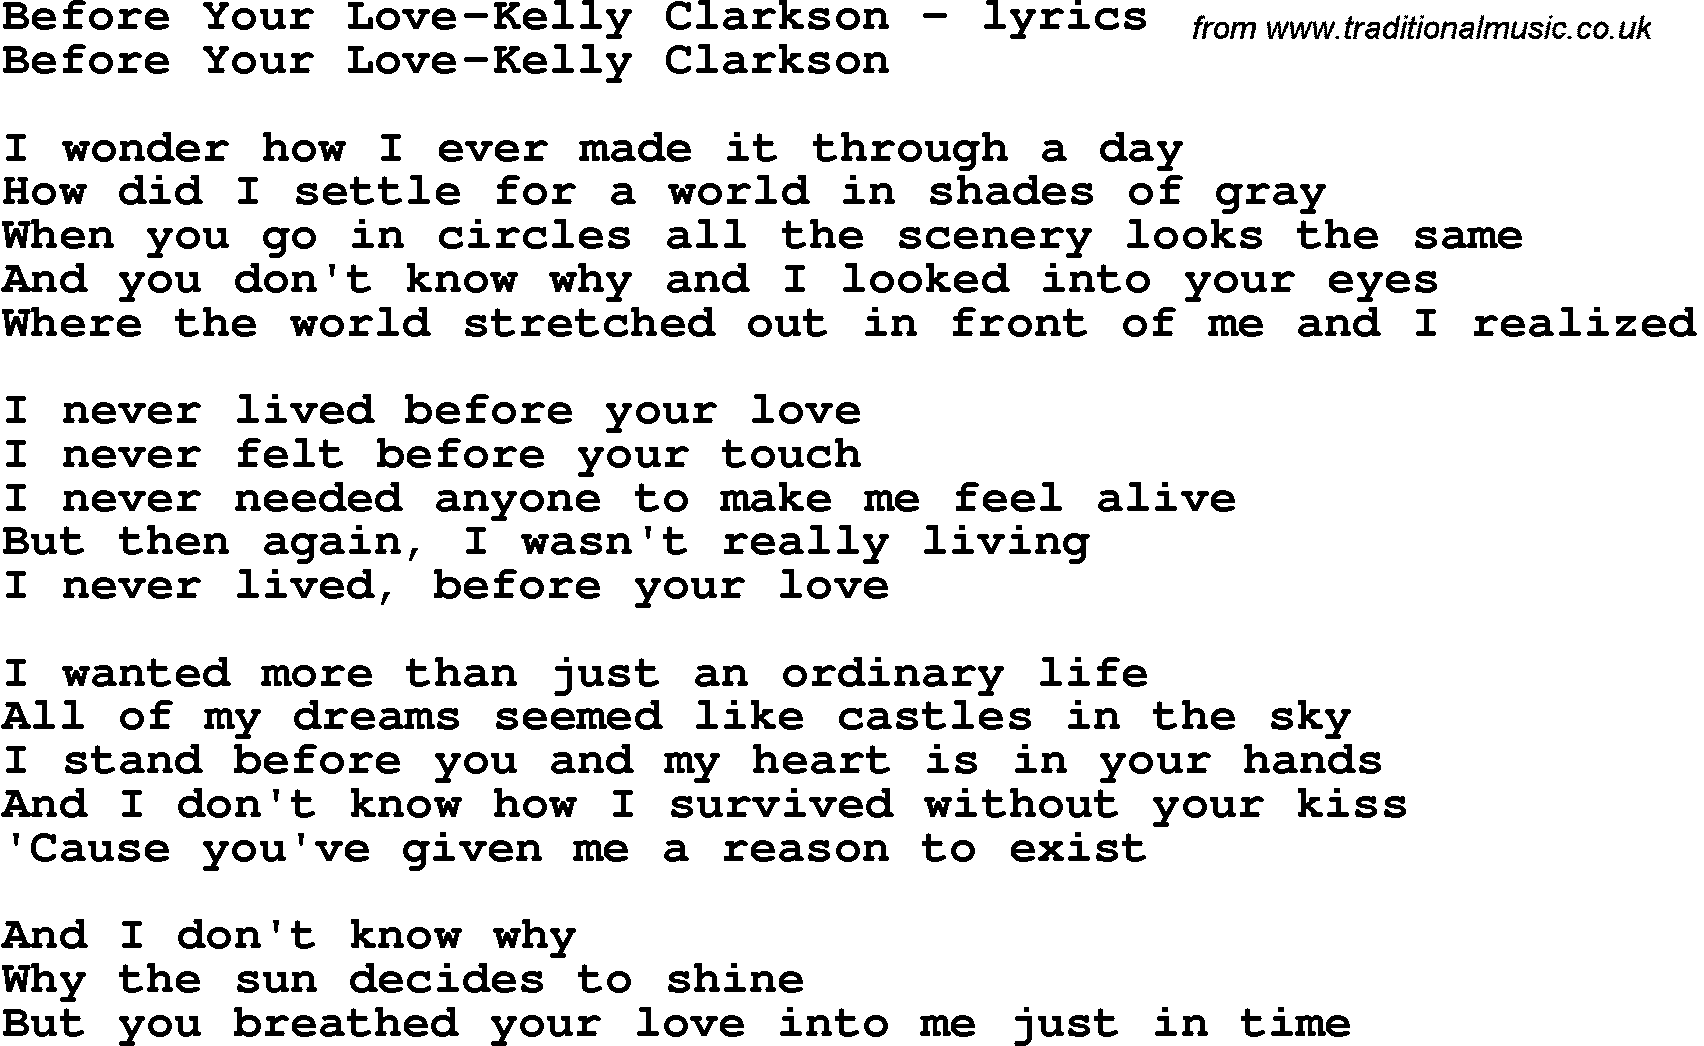 Love Song Lyrics For Before Your Love Kelly Clarkson